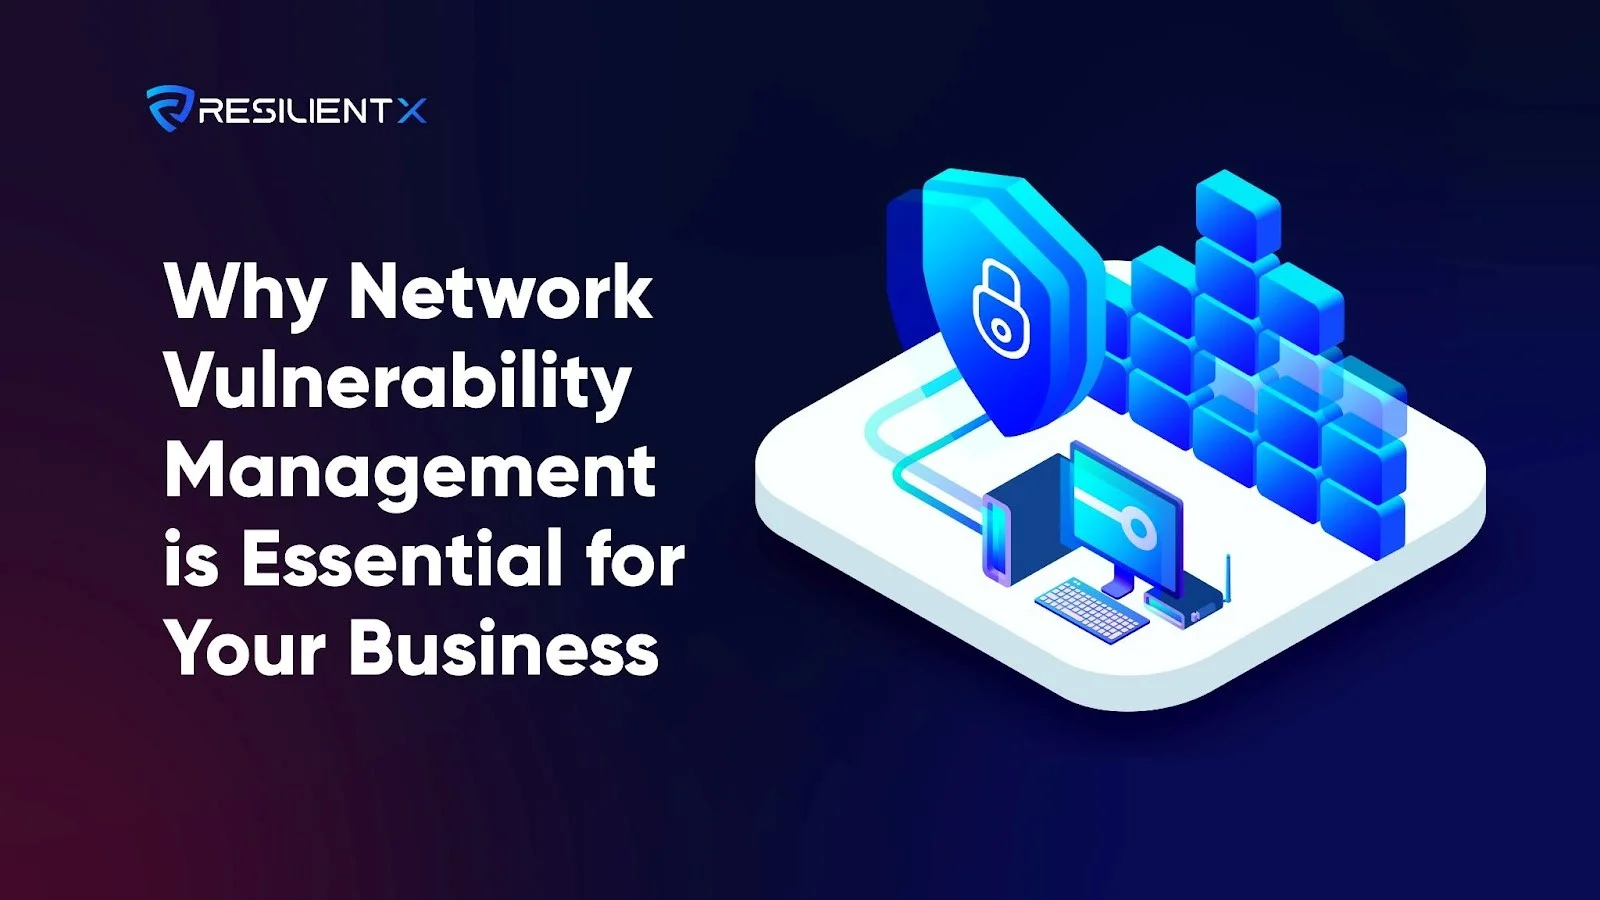 Why Network Vulnerability Management is Essential for Your Business